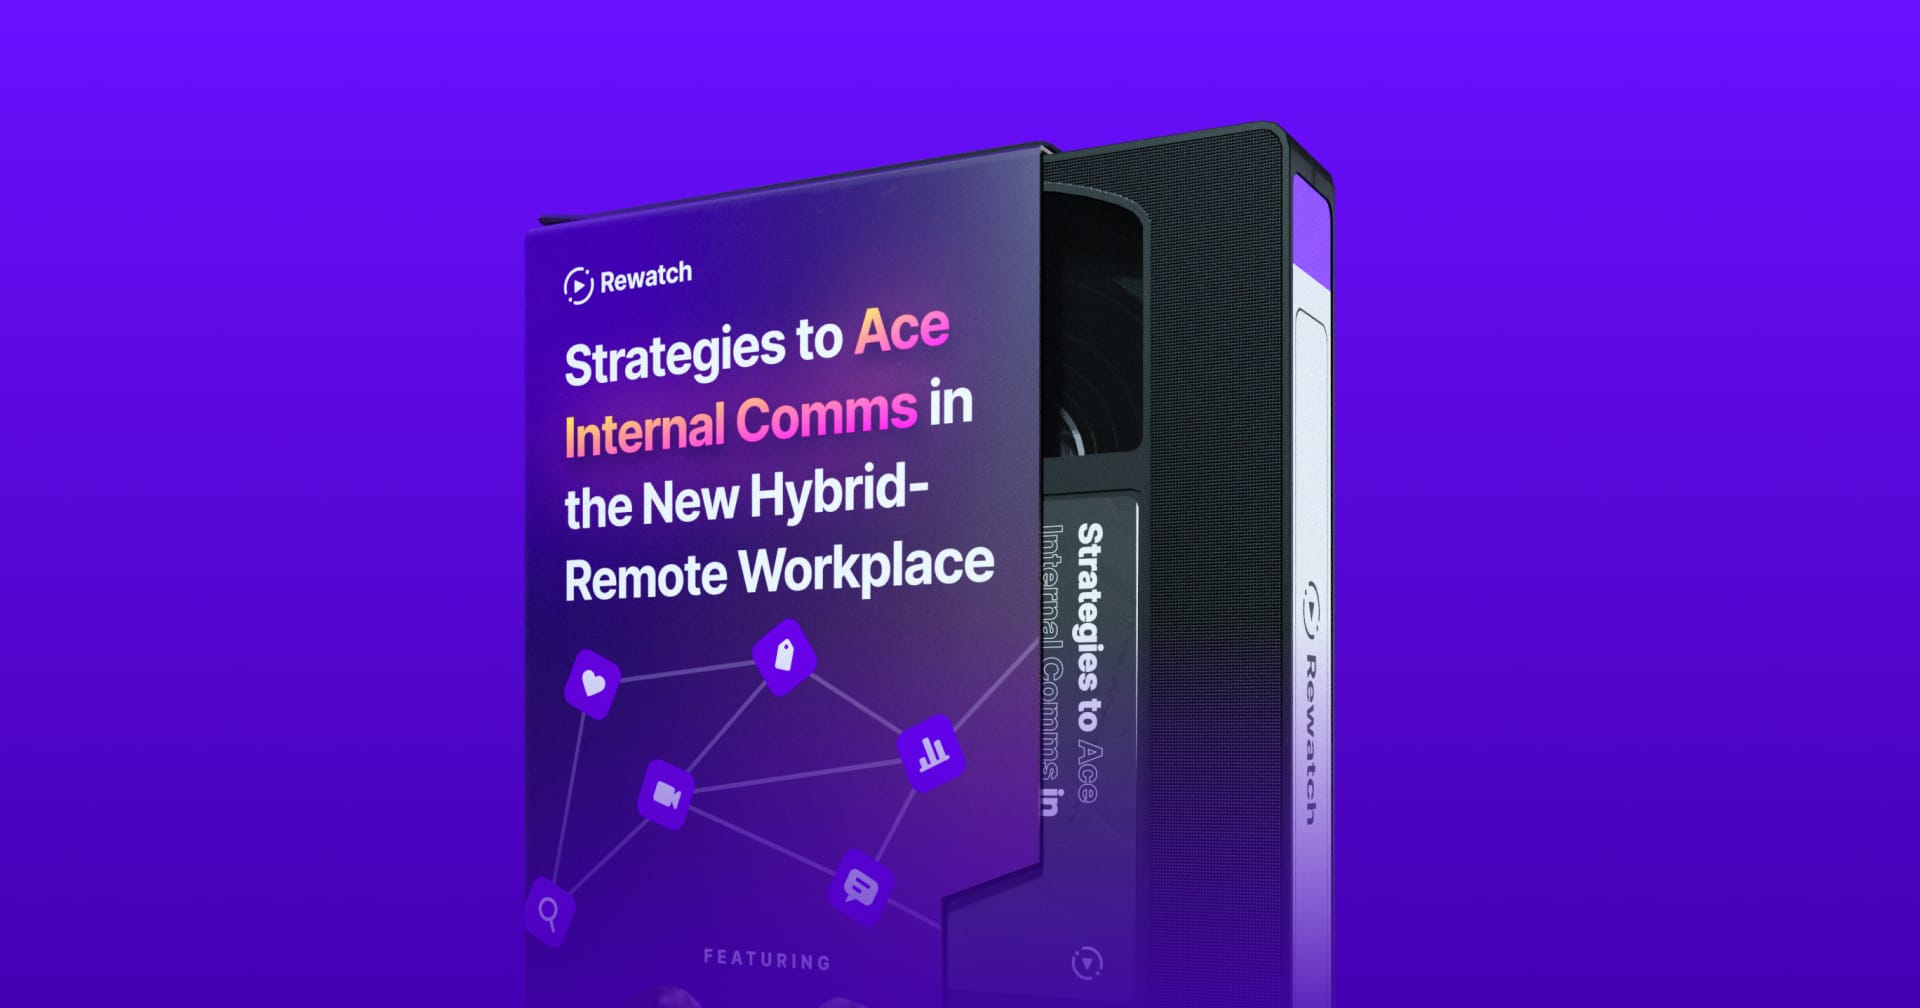 Strategies to Ace Internal Comms in the New Hybrid-Remote Workplace webinar VHS tape.